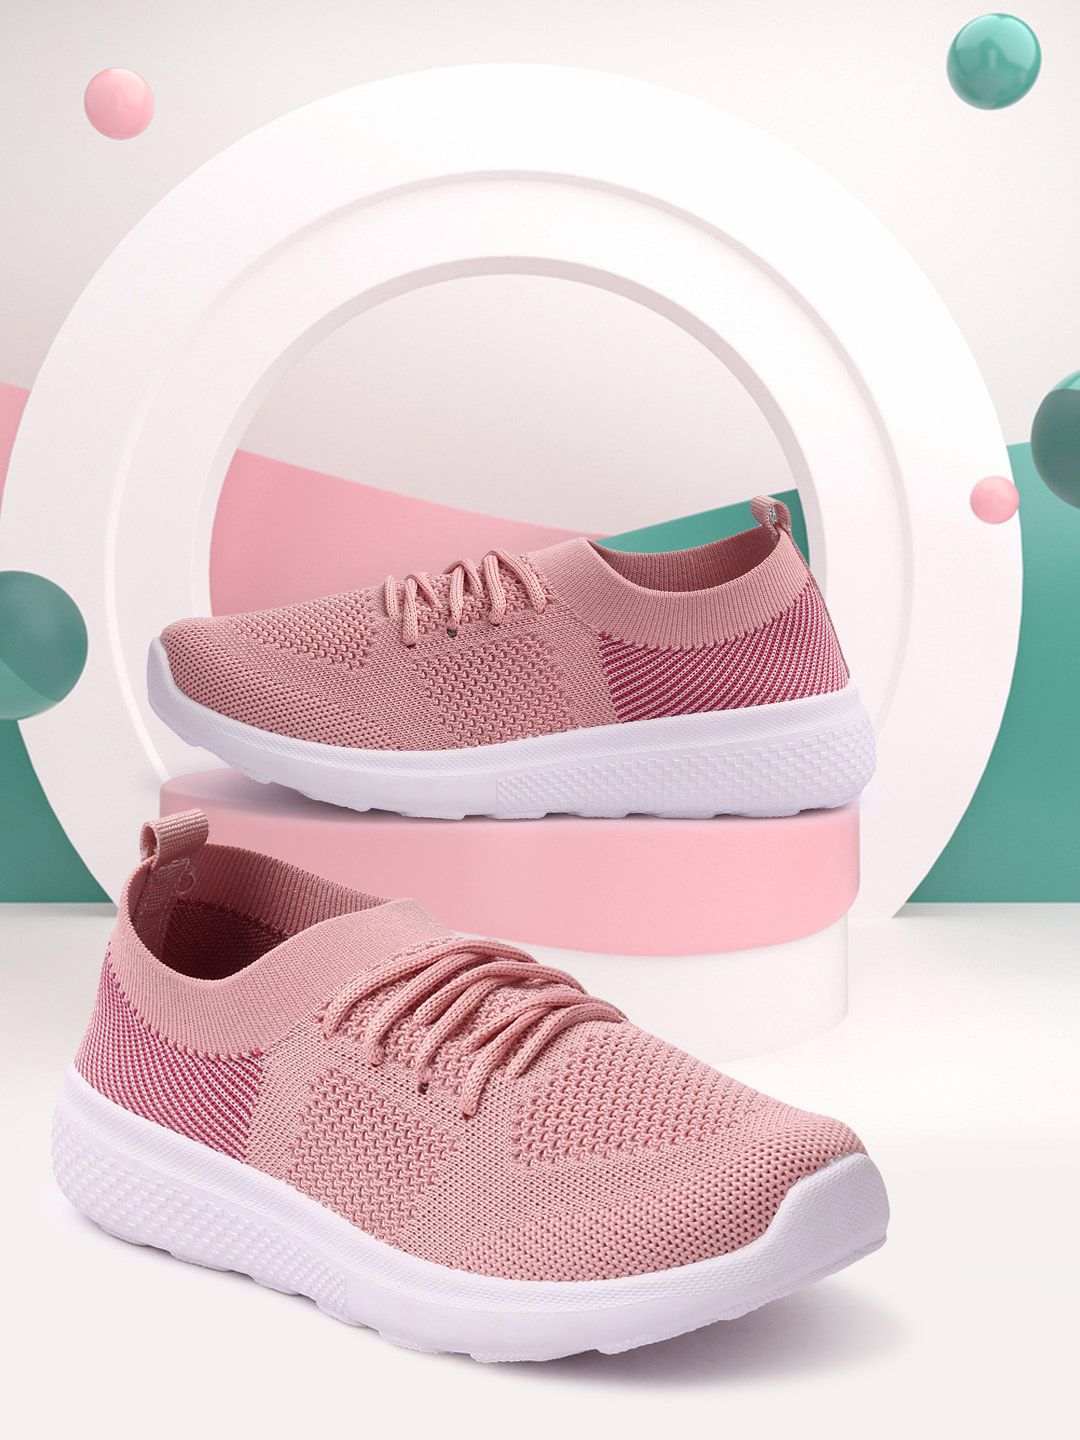 Mast & Harbour Women Peach-Coloured Woven Design Lightweight Slip-On Sneakers Price in India